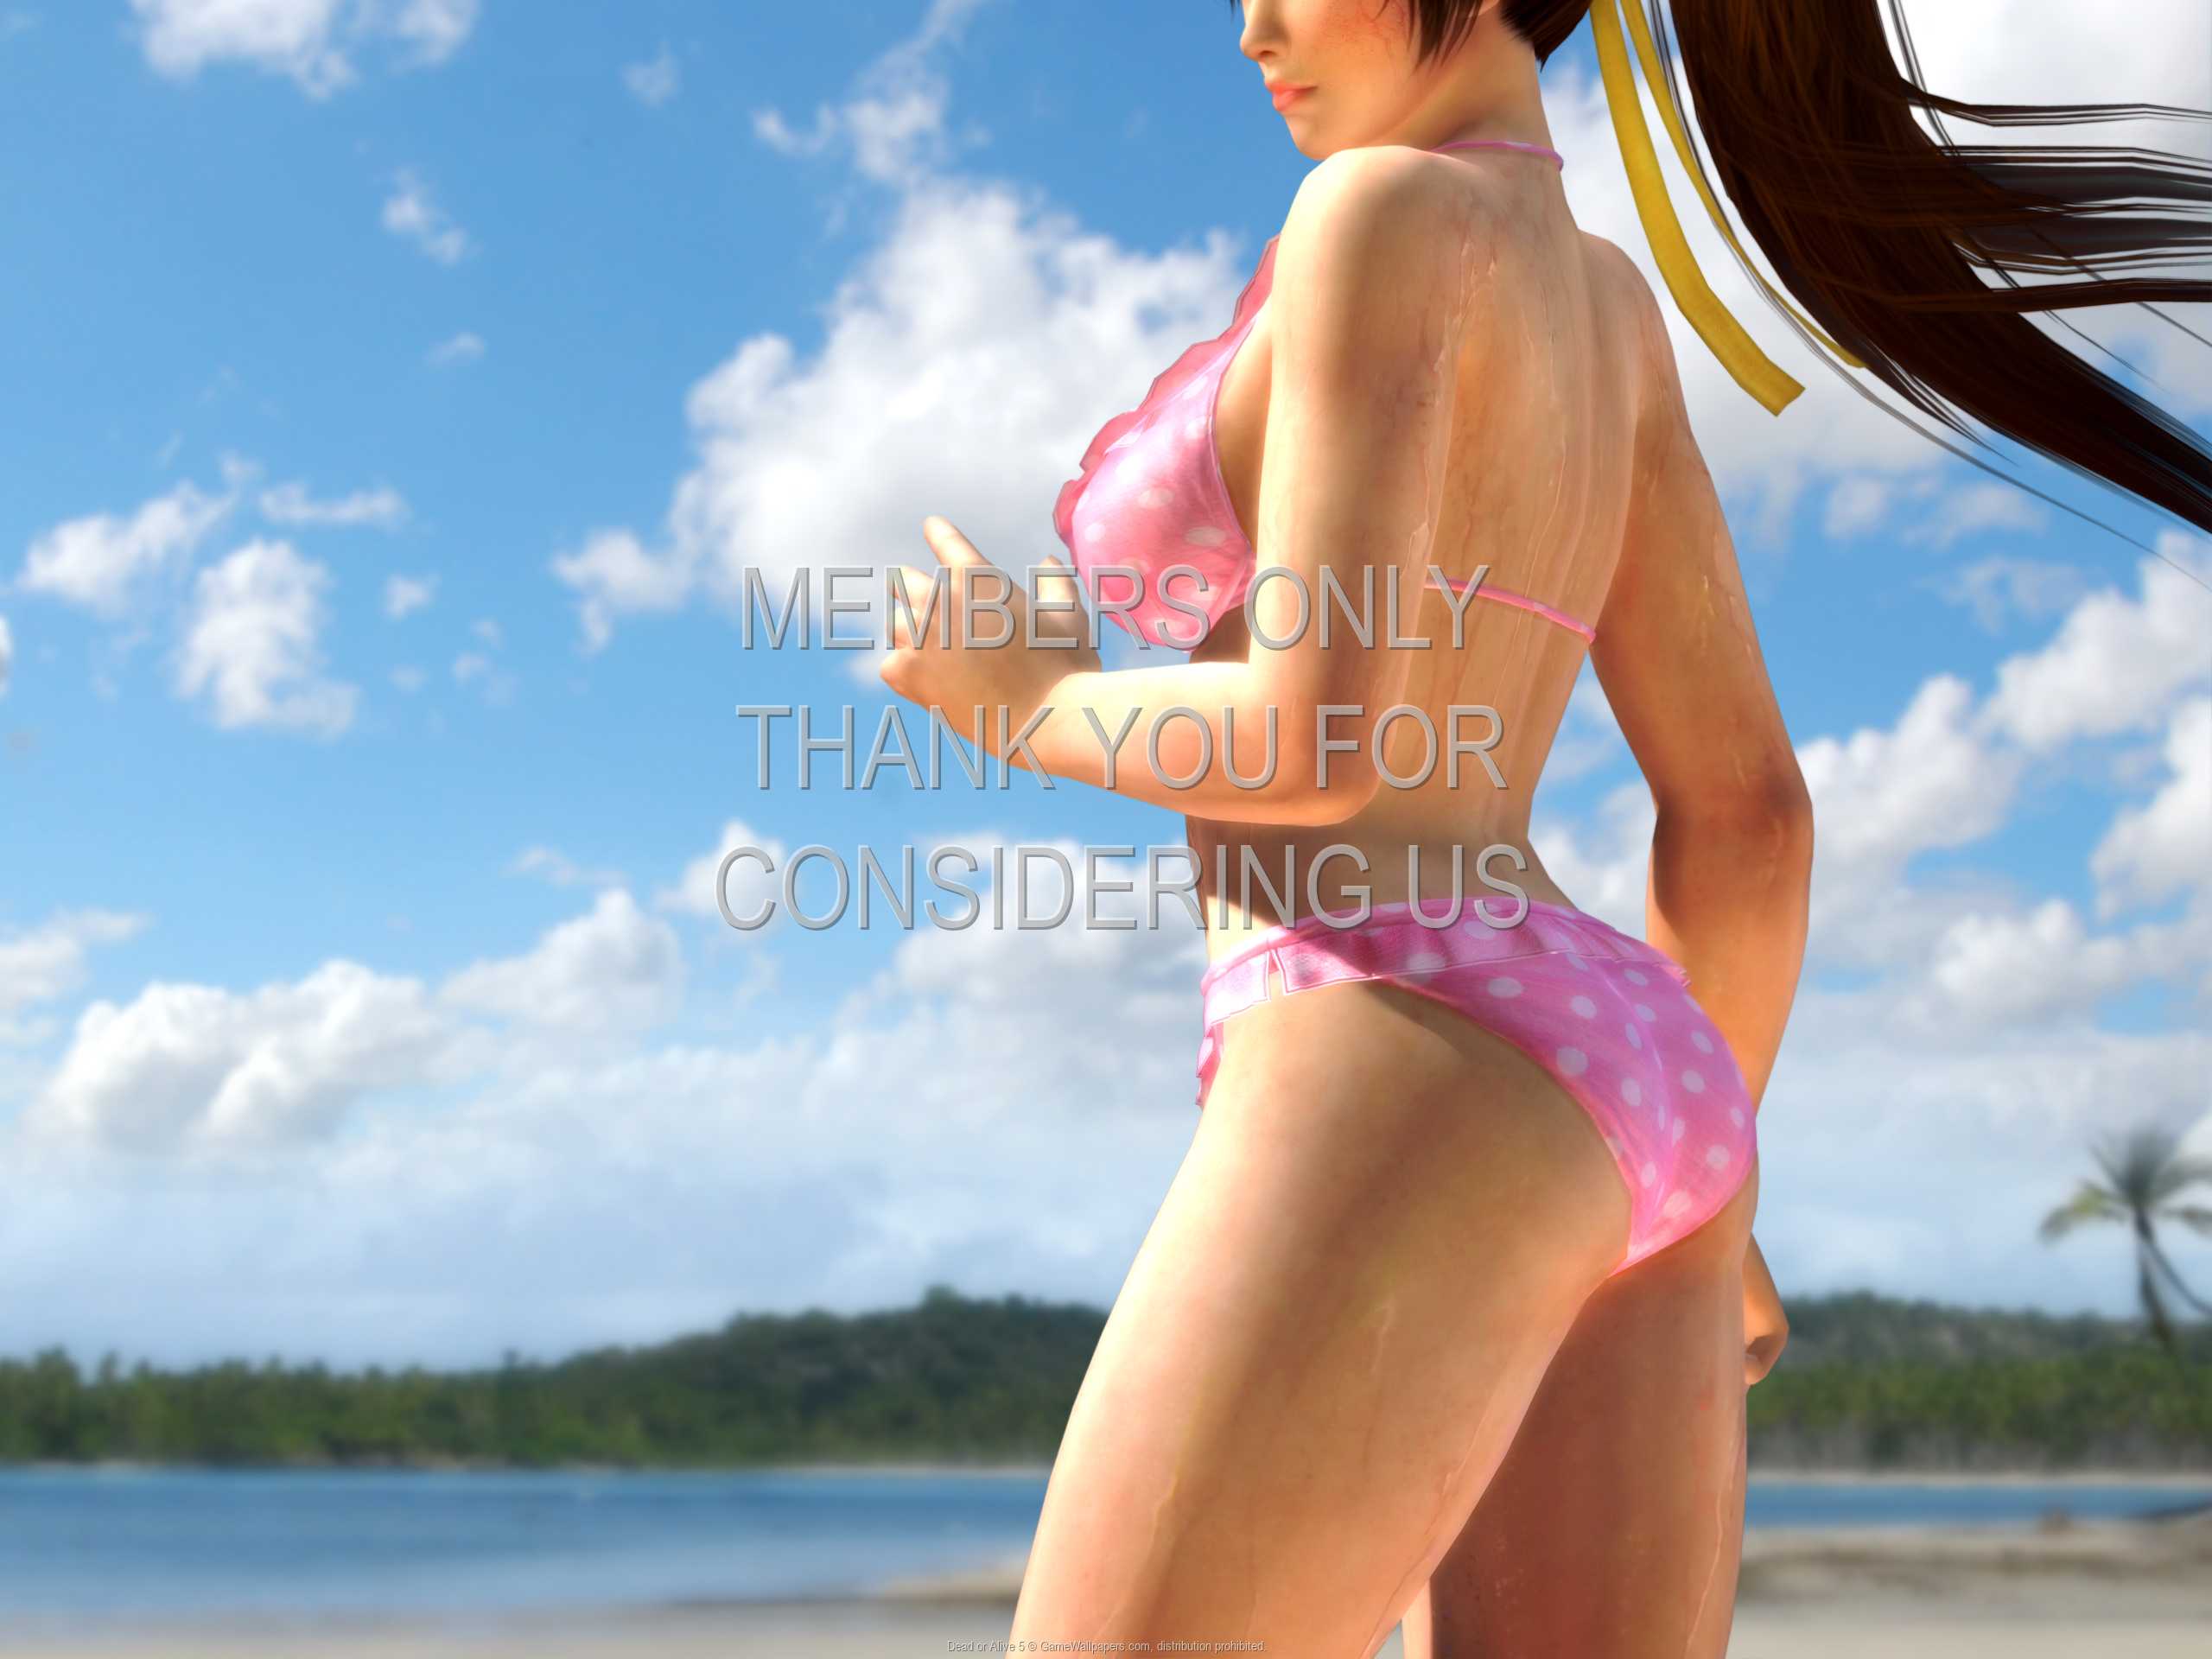 Dead or Alive 5 1080p%20Horizontal Mobile wallpaper or background 06